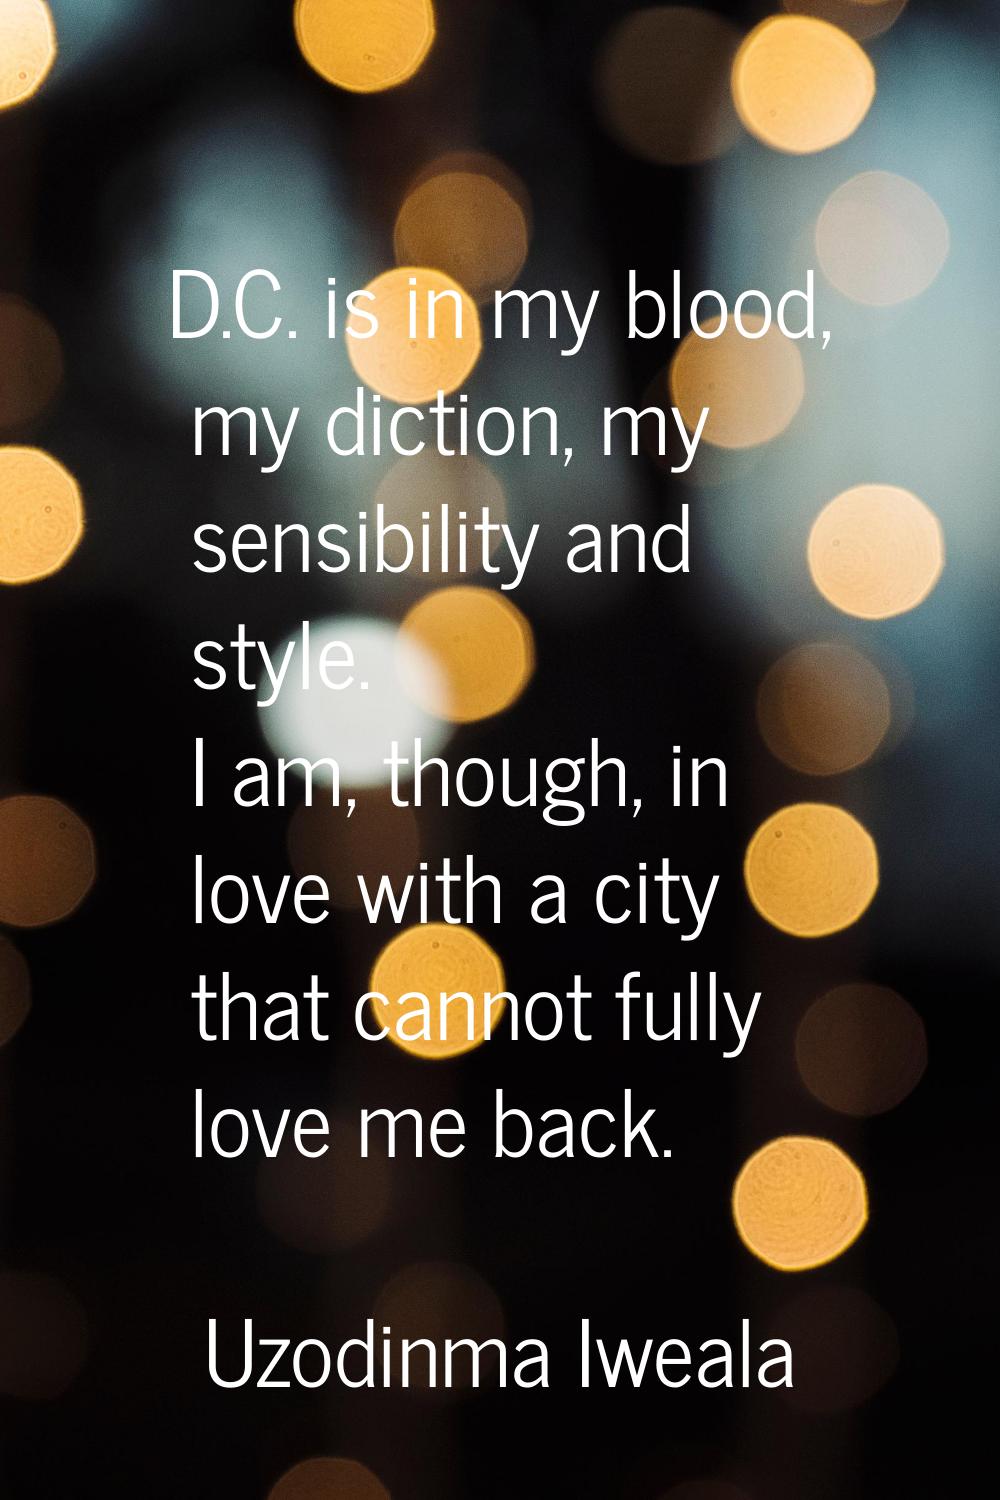 D.C. is in my blood, my diction, my sensibility and style. I am, though, in love with a city that c